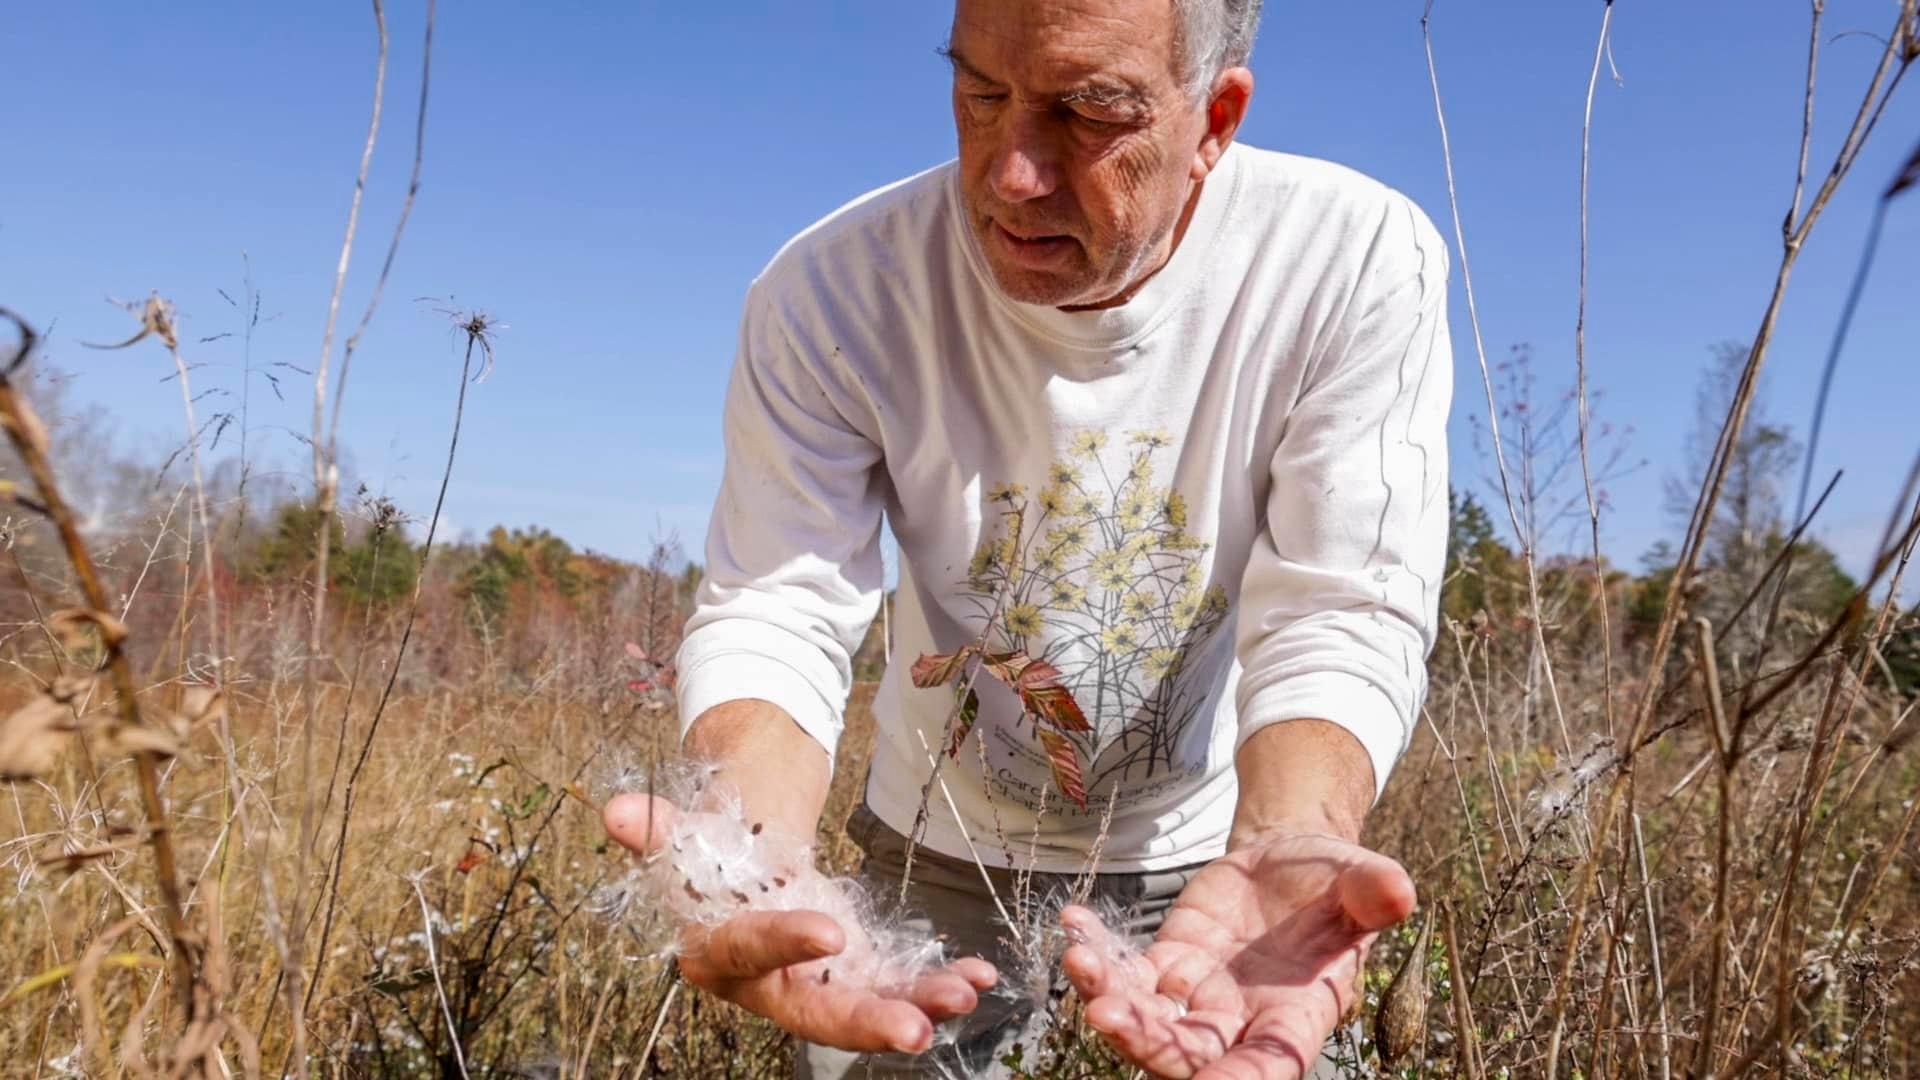 A man in a white long-sleeved T-shirt with wildflowers on it stands in a field of tall grasses with blue sky behind him. He is looking down at his hands, which are full of white fluffy milkweed seeds.